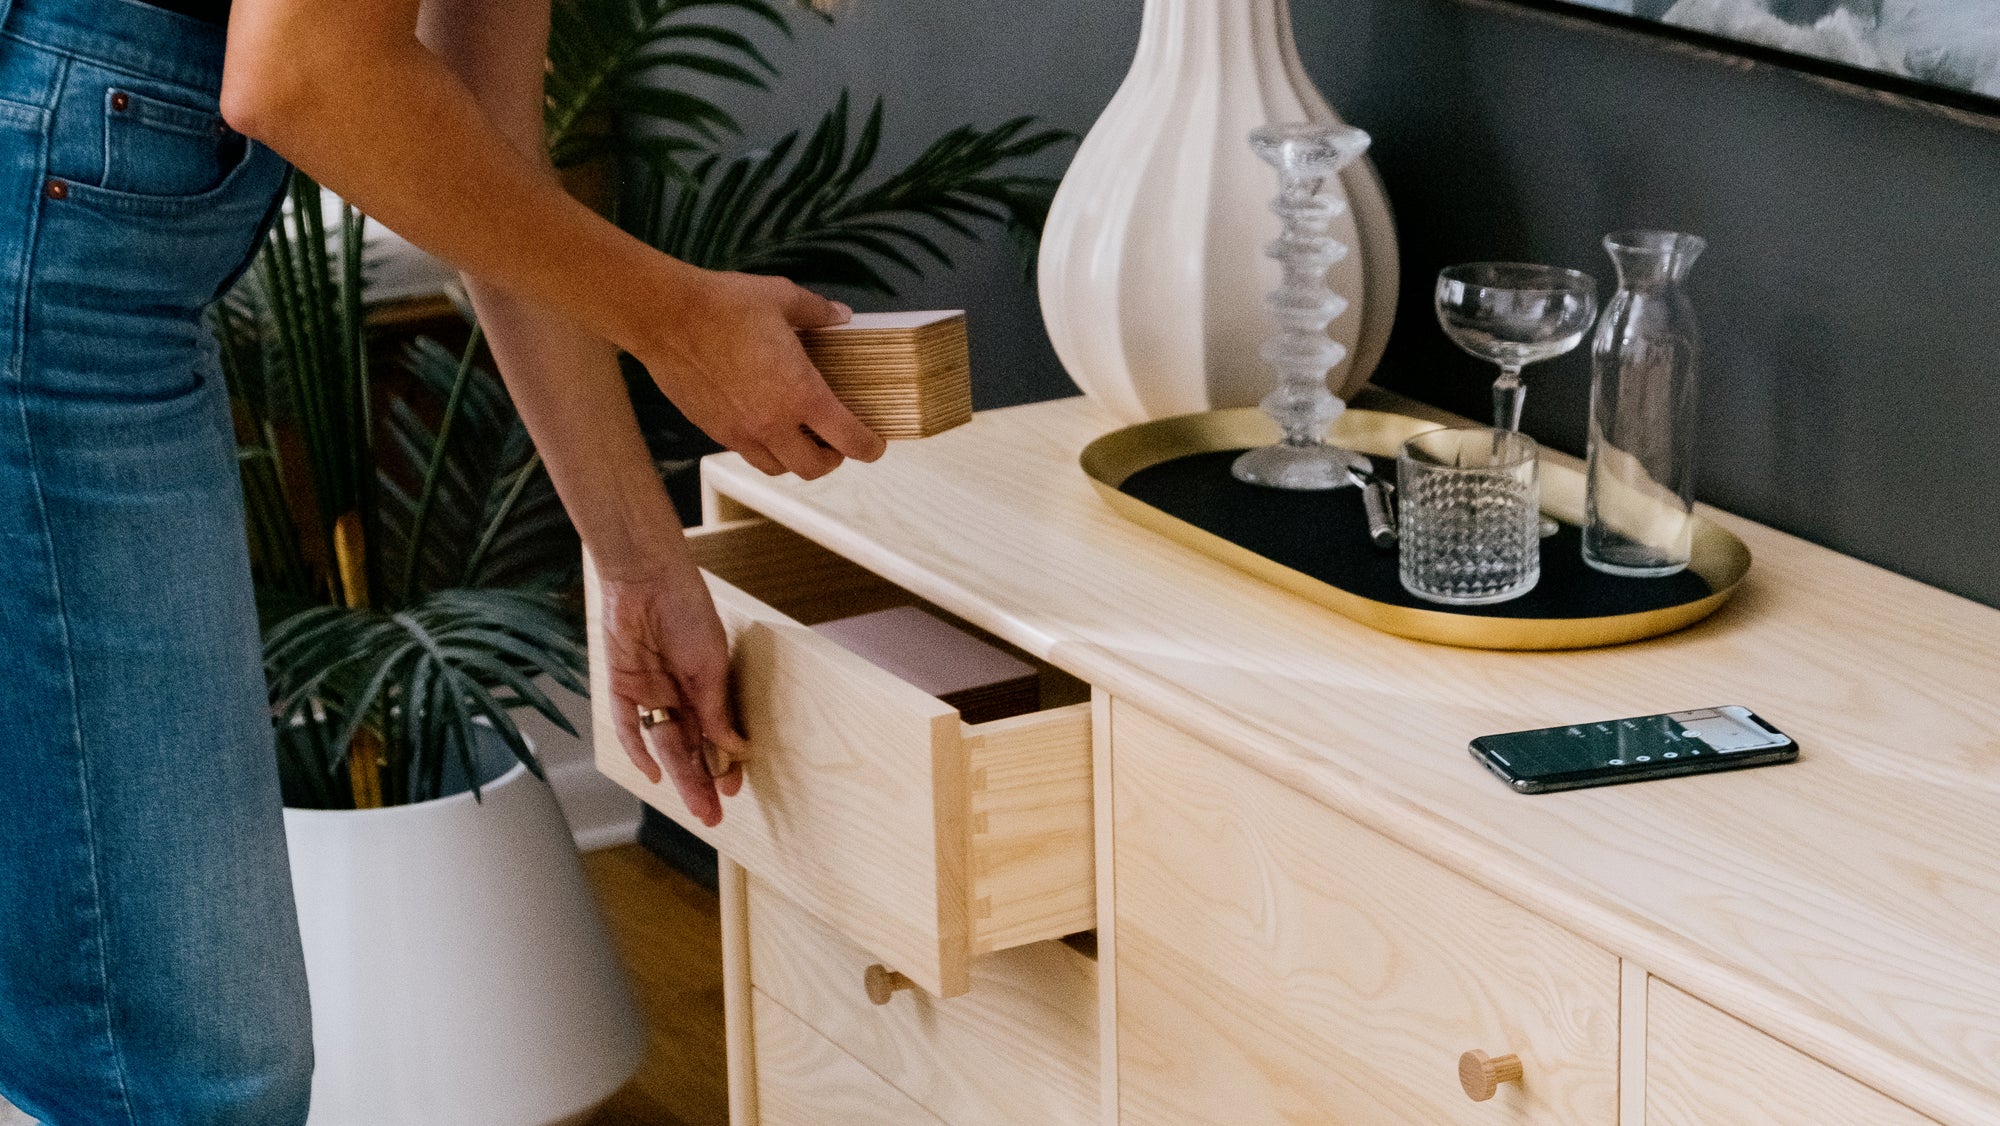 We’re Leading the Evolution of Furniture With Smart Locking Furniture for the Home